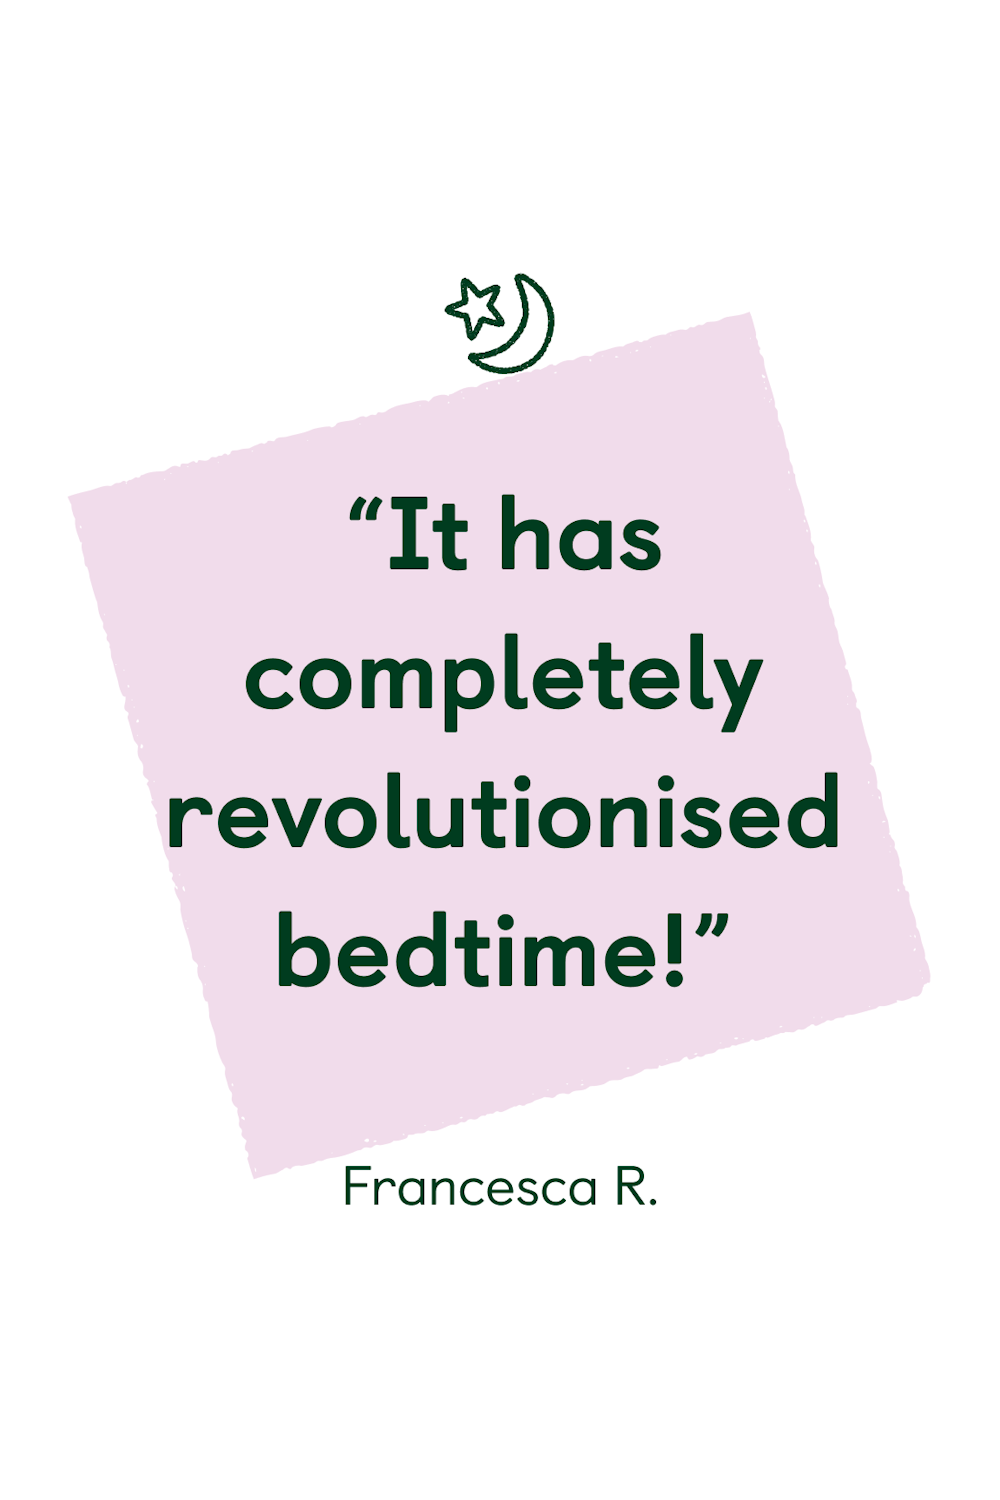 “It has completely revolutionised bedtime!”